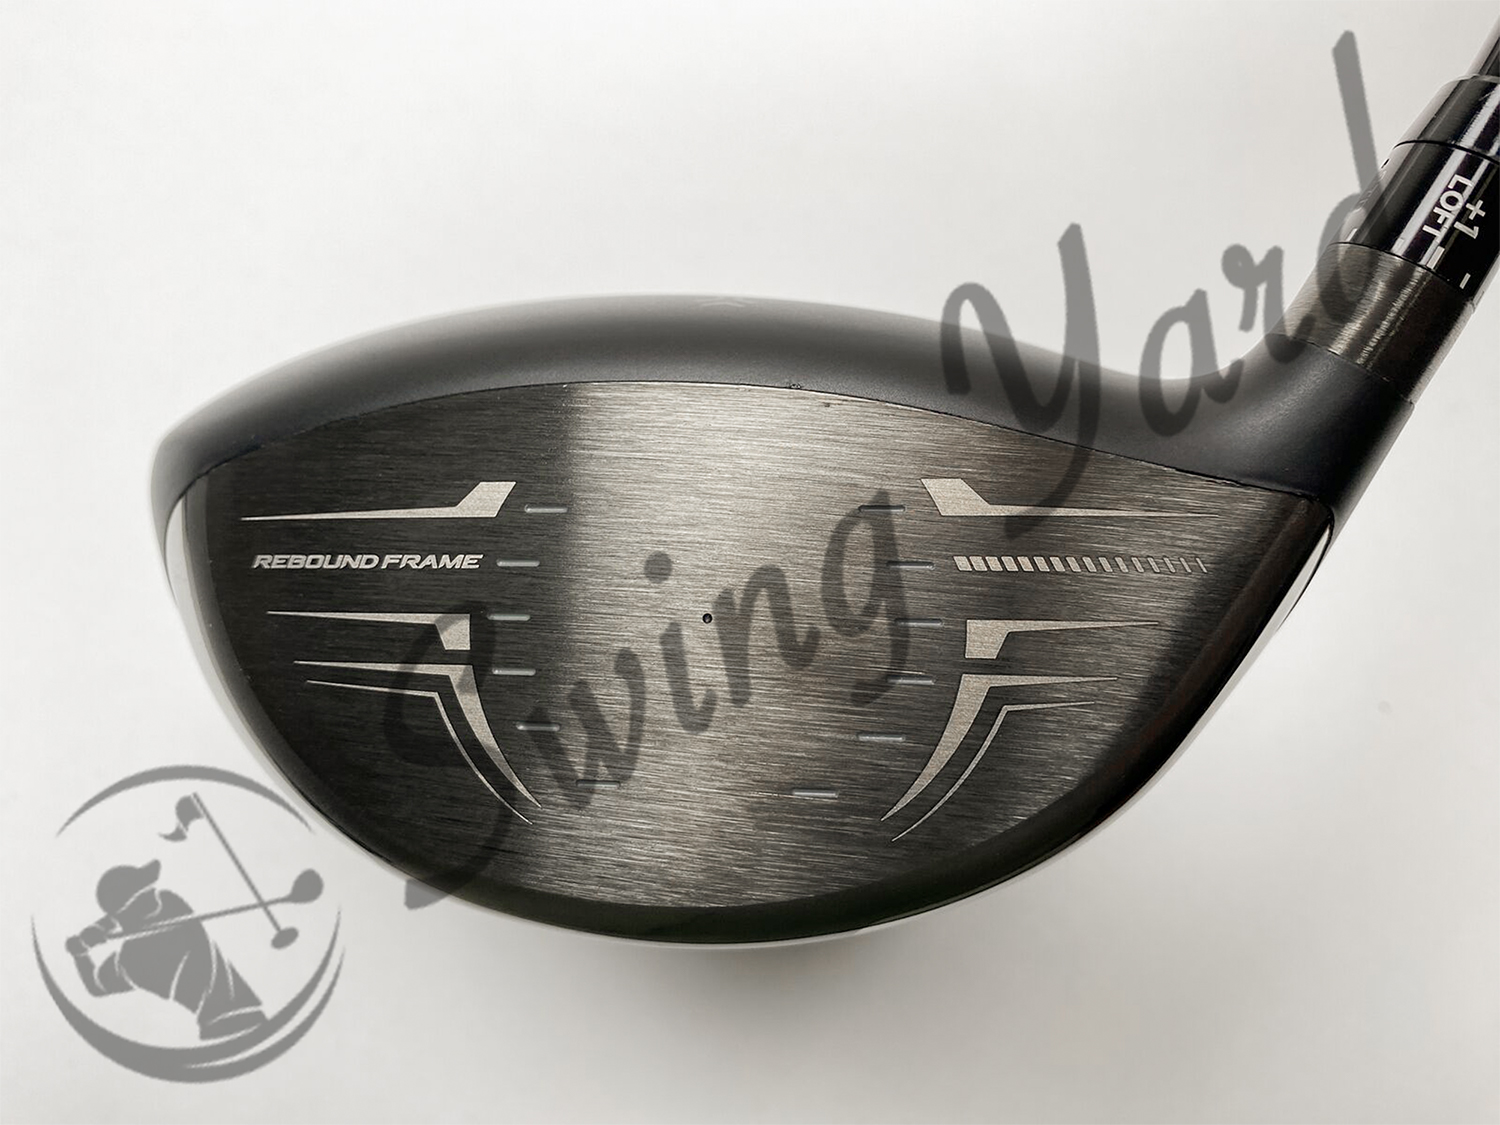 The club face of the Srixon ZX5 MK II driver